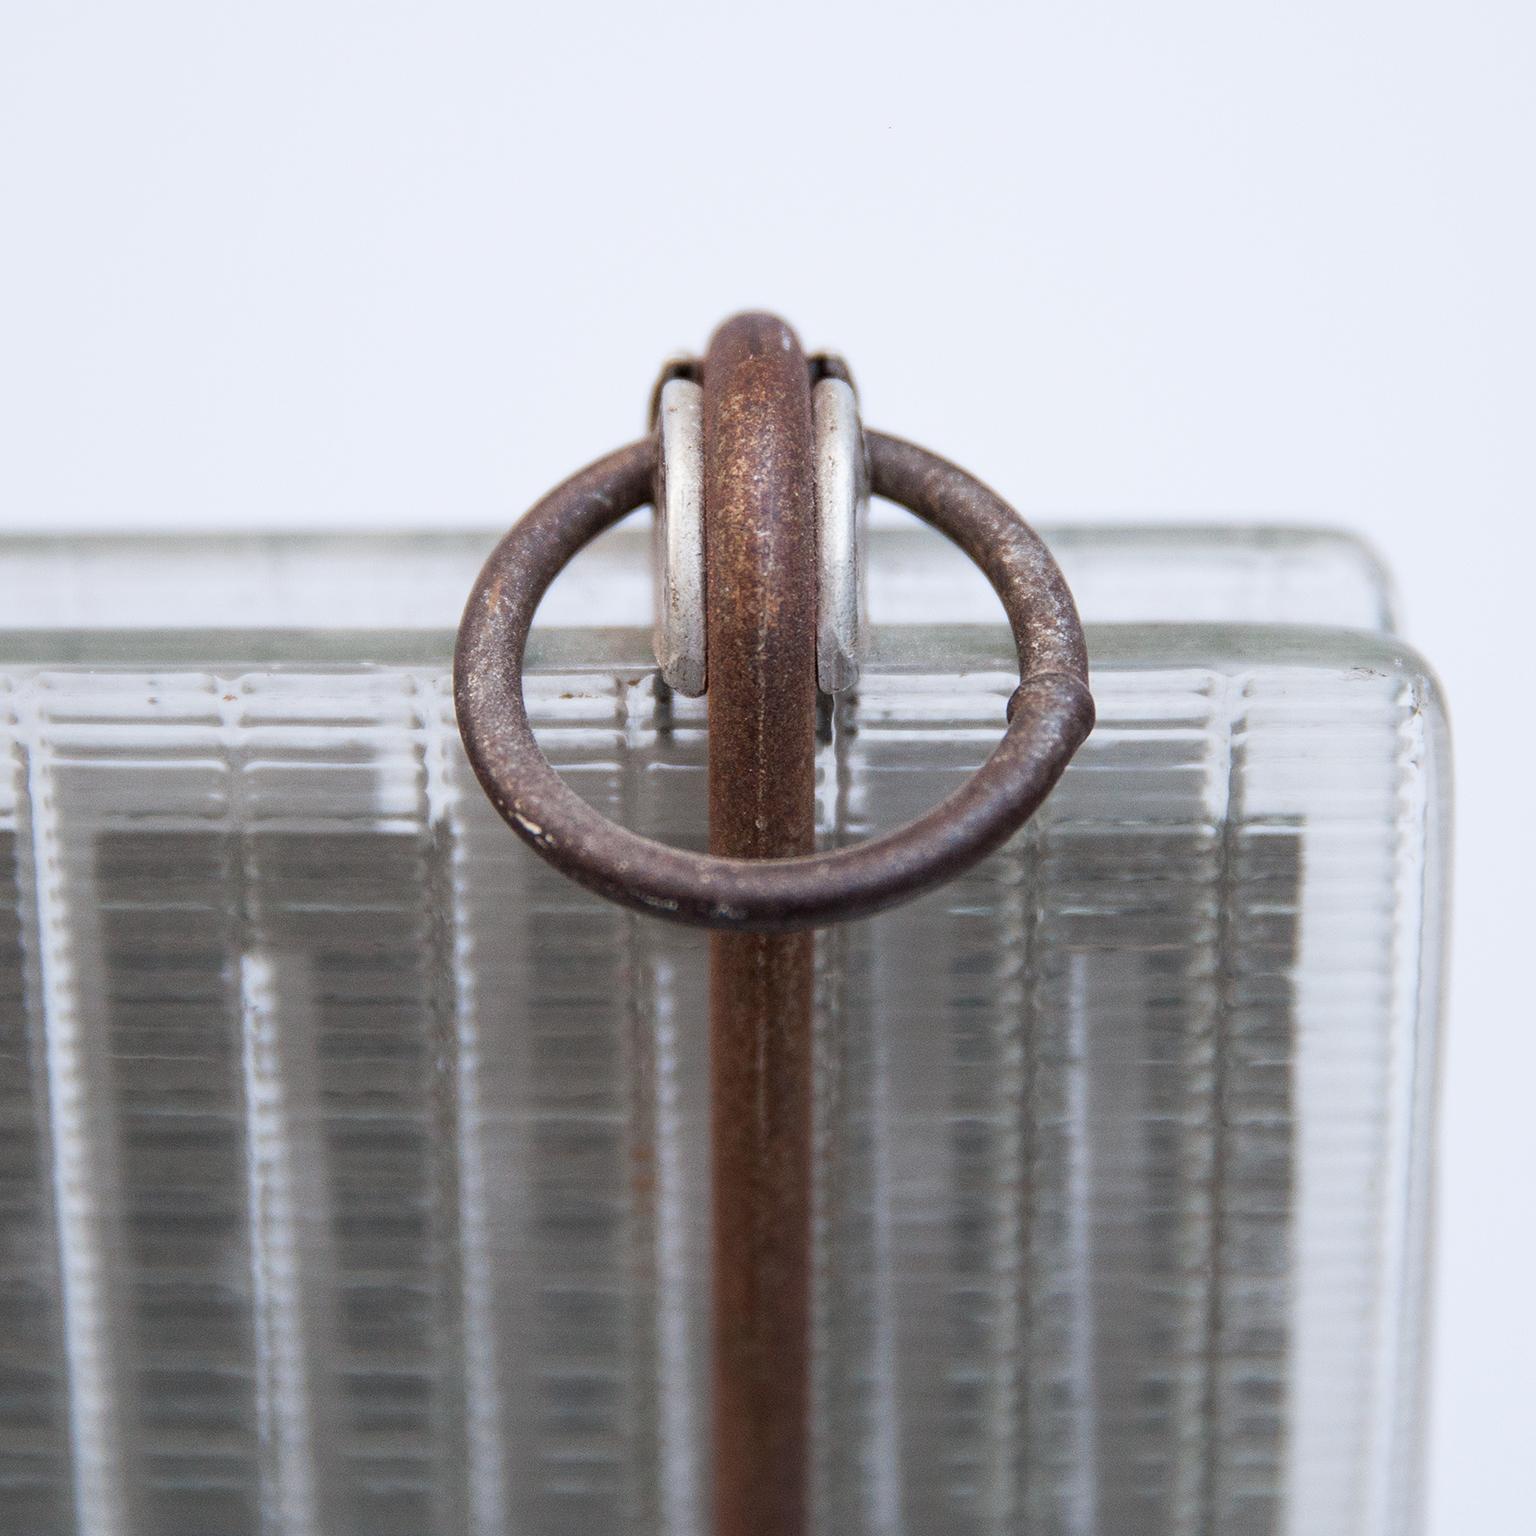 Mid-20th Century Glass Radiator by Rene-Andre Coulon for Saint-Goban, France, 1937 For Sale